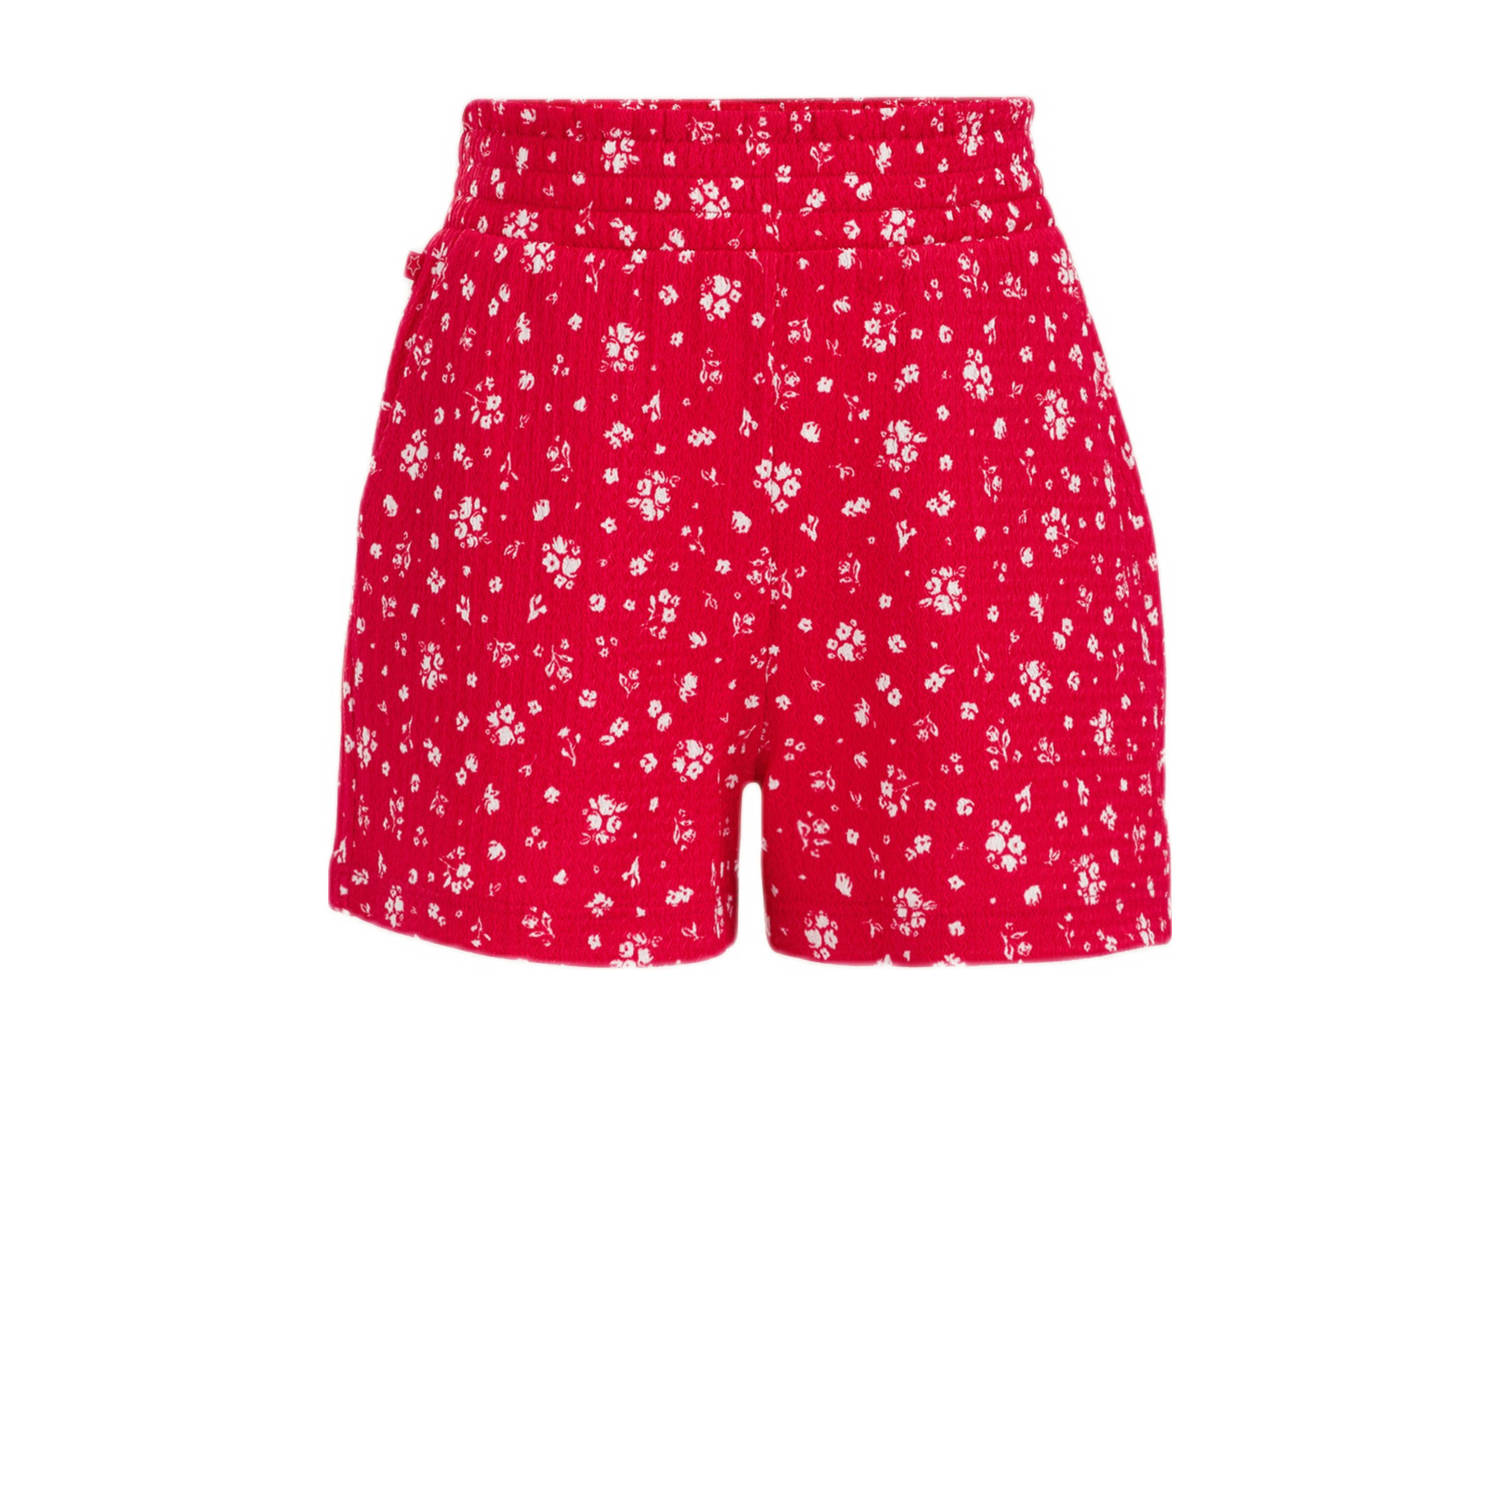 WE Fashion straight fit casual short met all over print rood Korte broek Meisjes Polyester 110 116